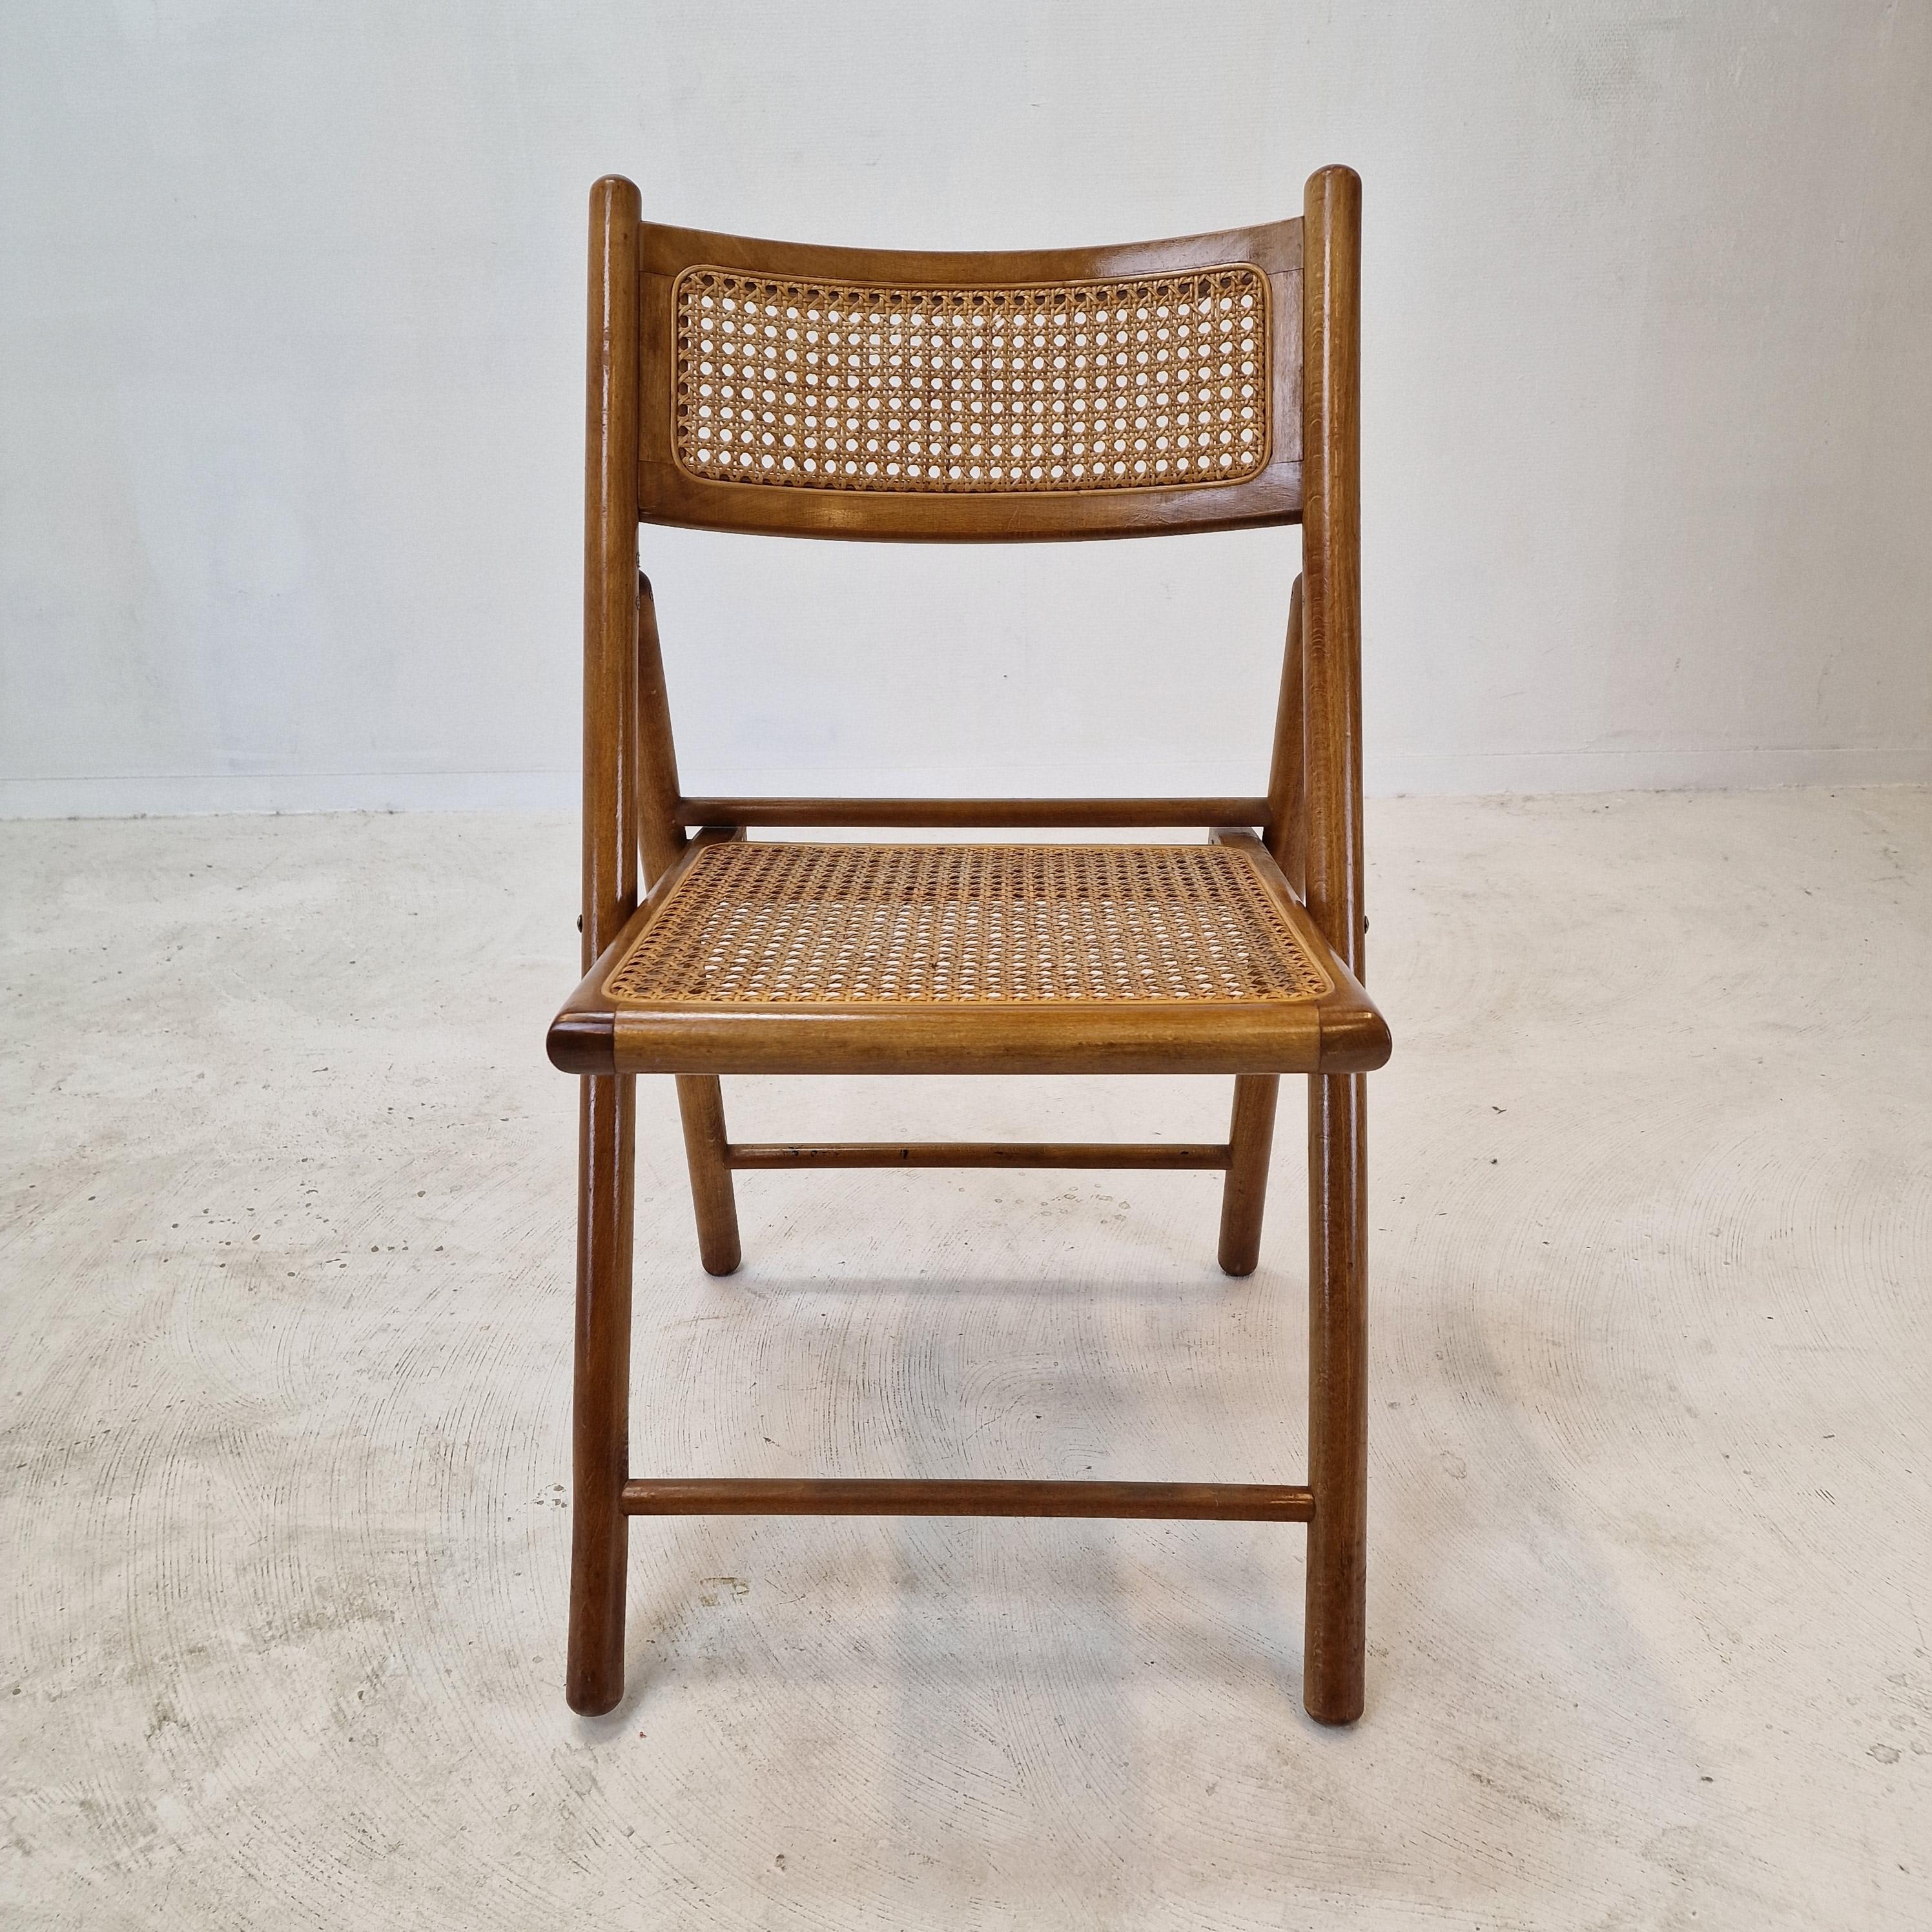 Set of 4 Italian Folding Chairs with Rattan, 1980s For Sale 9